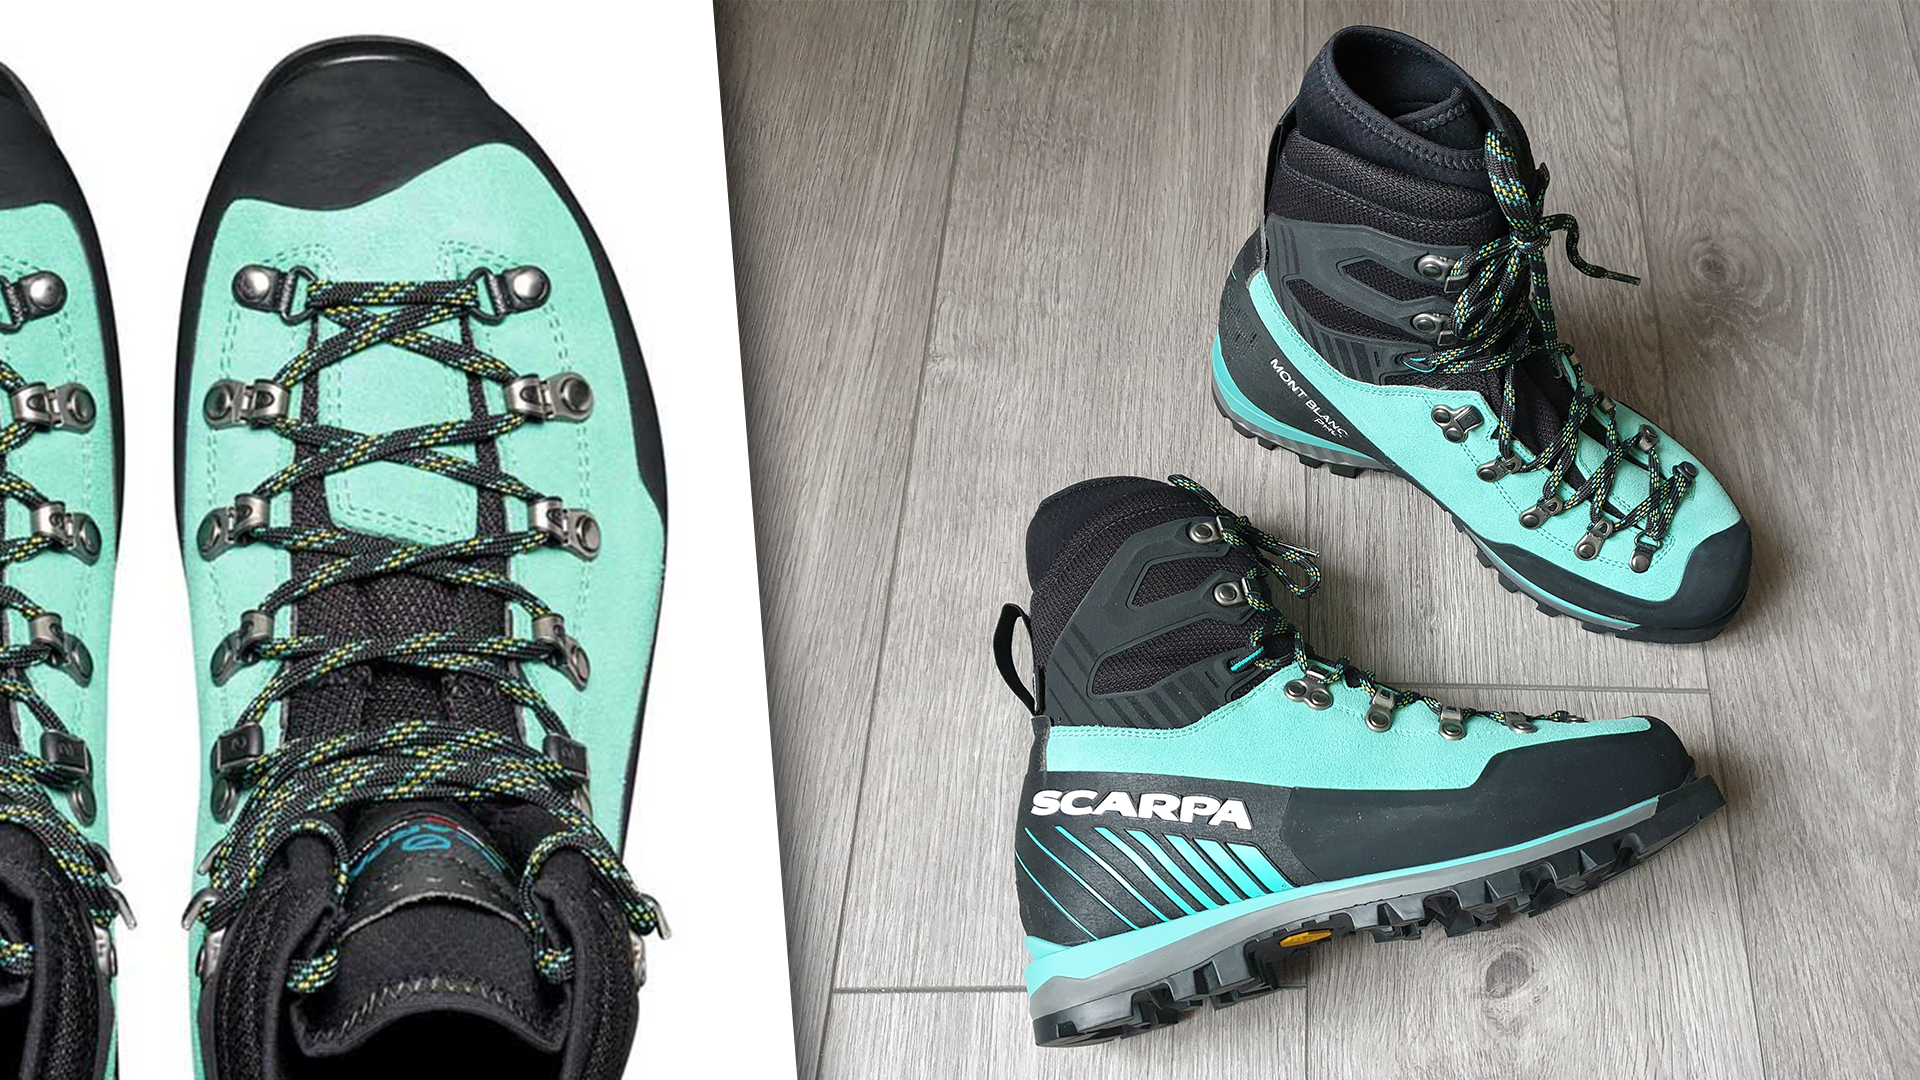 Best Mountaineering Boots: Scarpa Mont Blanc Pro